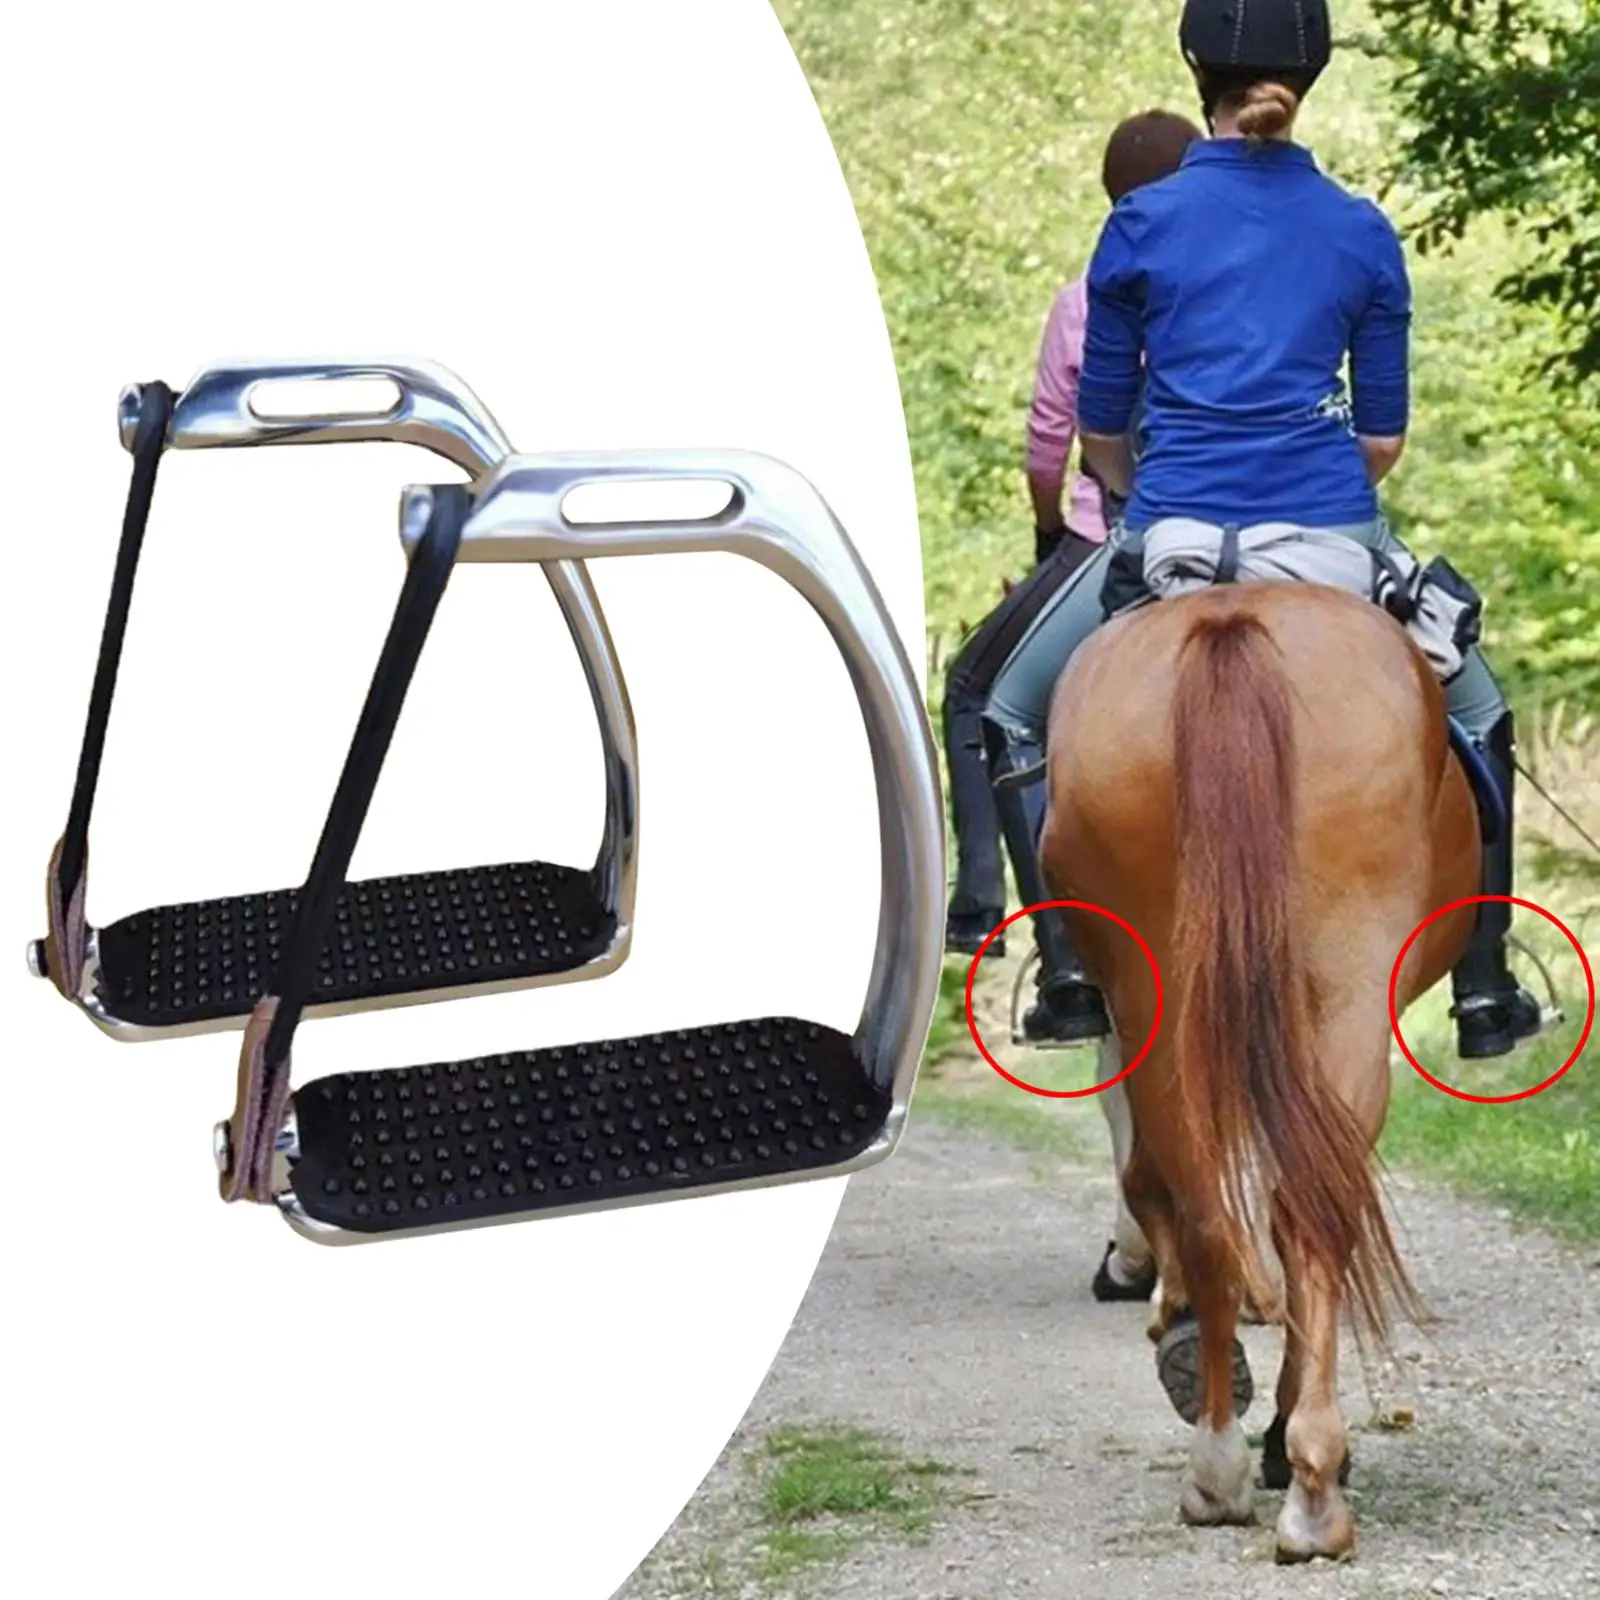 2x Protection Saddle Rubber Pad Training Tool Thickening Non Slip Horse Riding Stirrups for Racing Western Riding Outdoor Adults